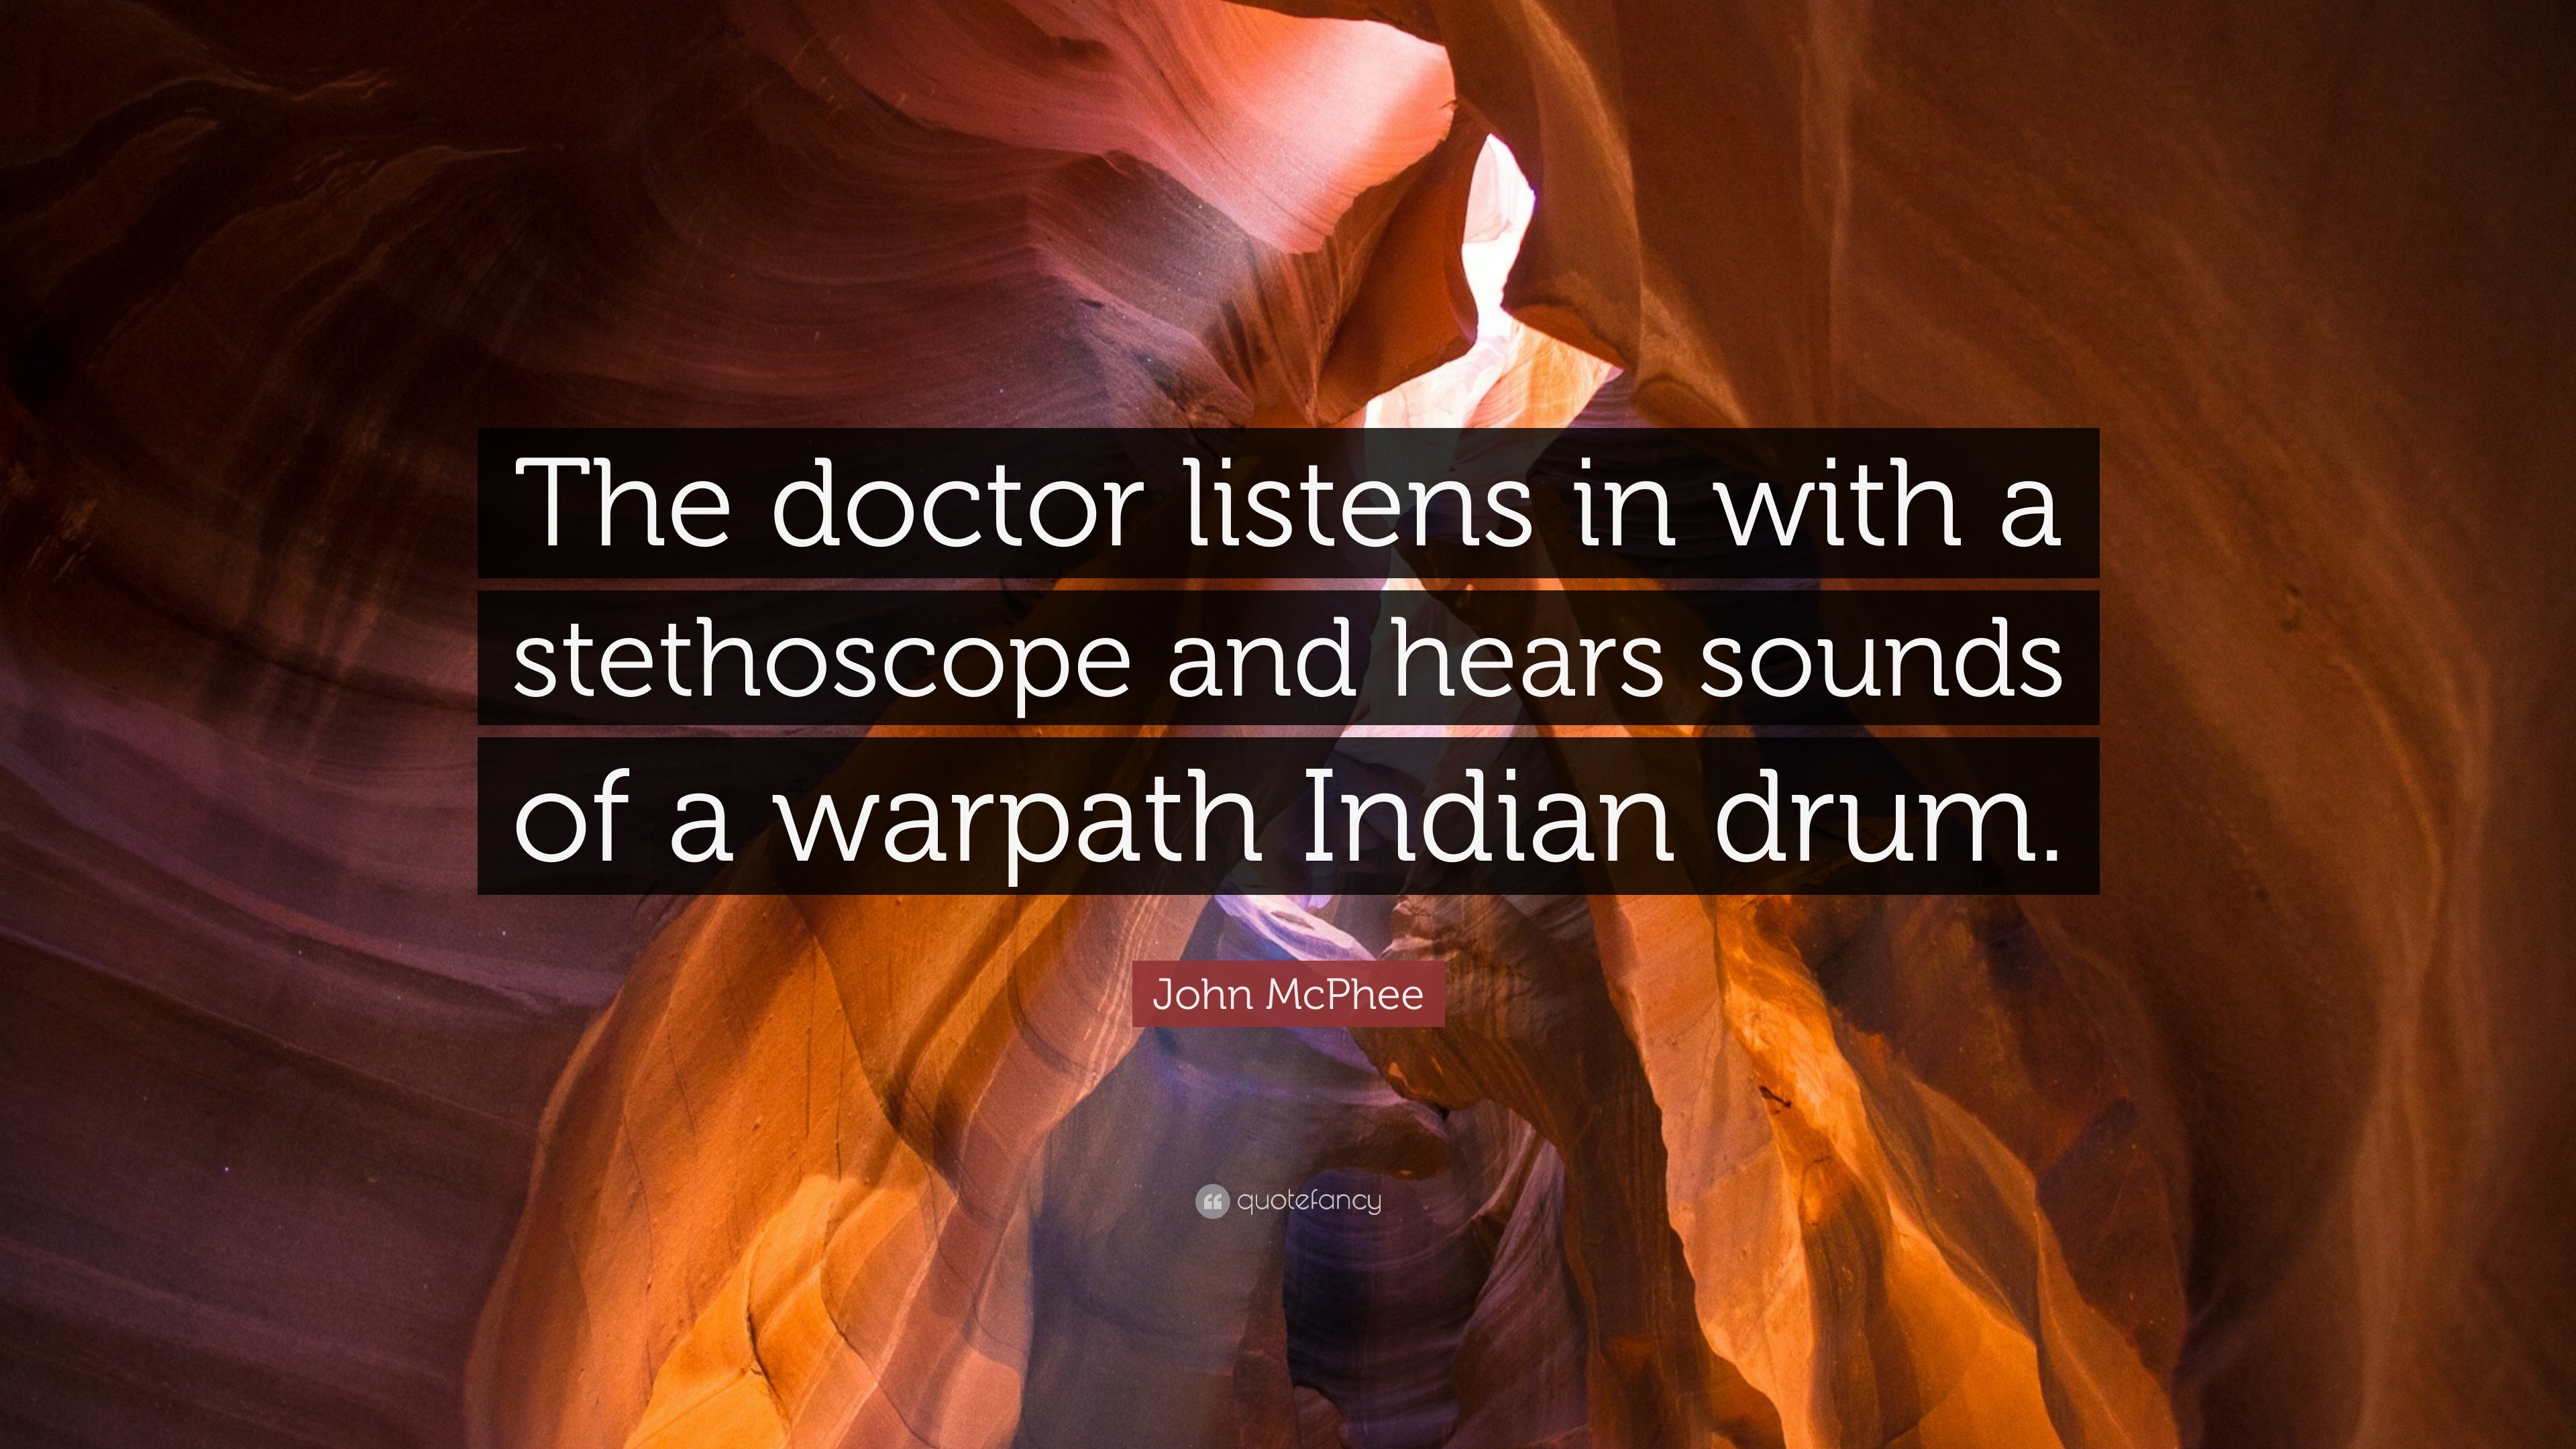 John McPhee Quote: “The doctor listens in with a stethoscope and hears  sounds of a warpath